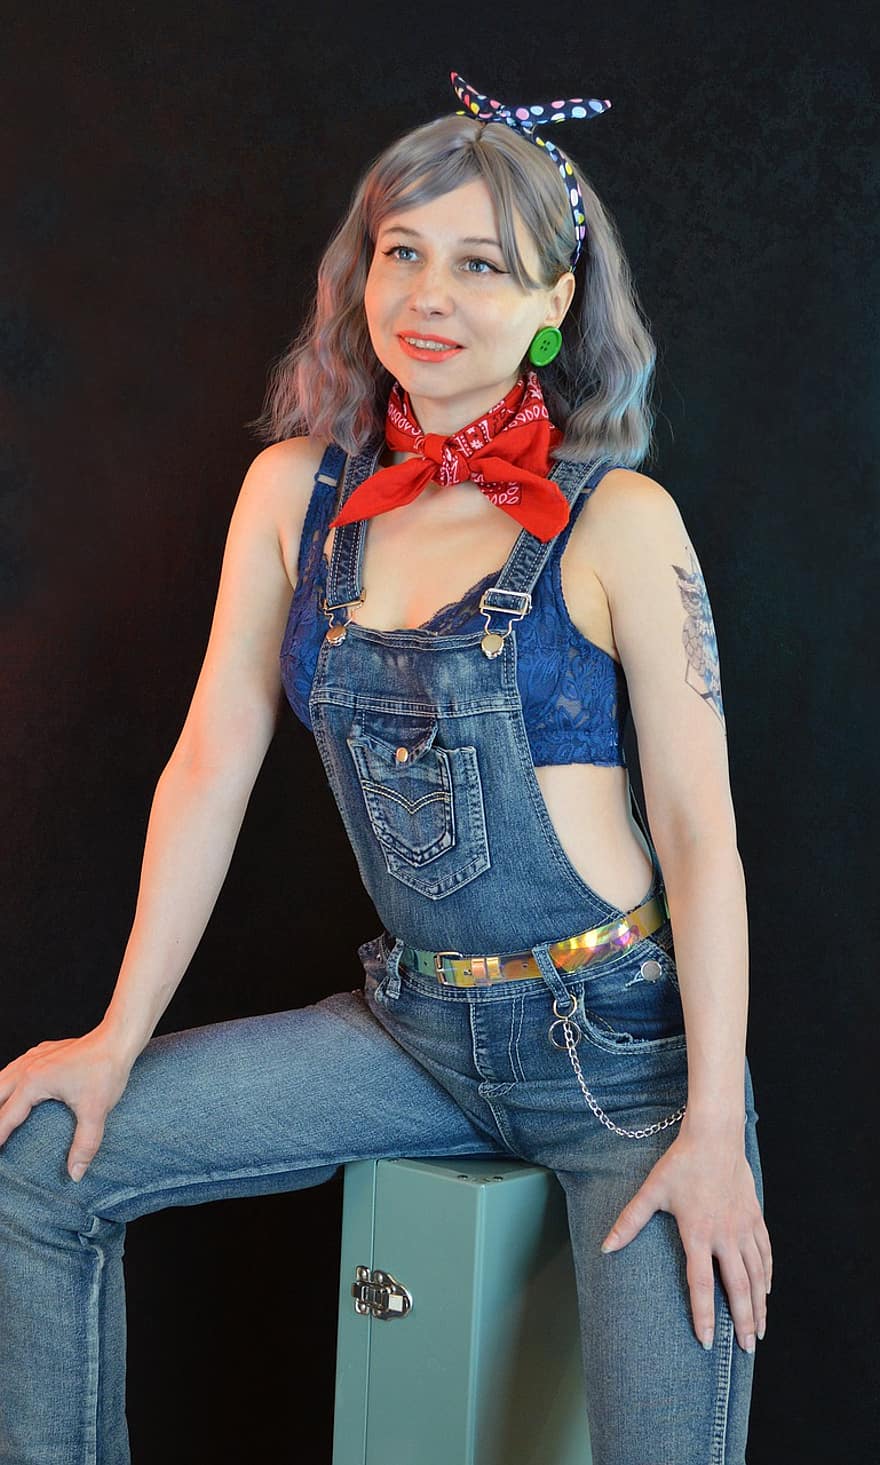 Woman, Fashion, Rockabilly Style, Girl, Pin Up, Denim Overalls, Retro, Style, Vintage, Rockabilly, Jeans